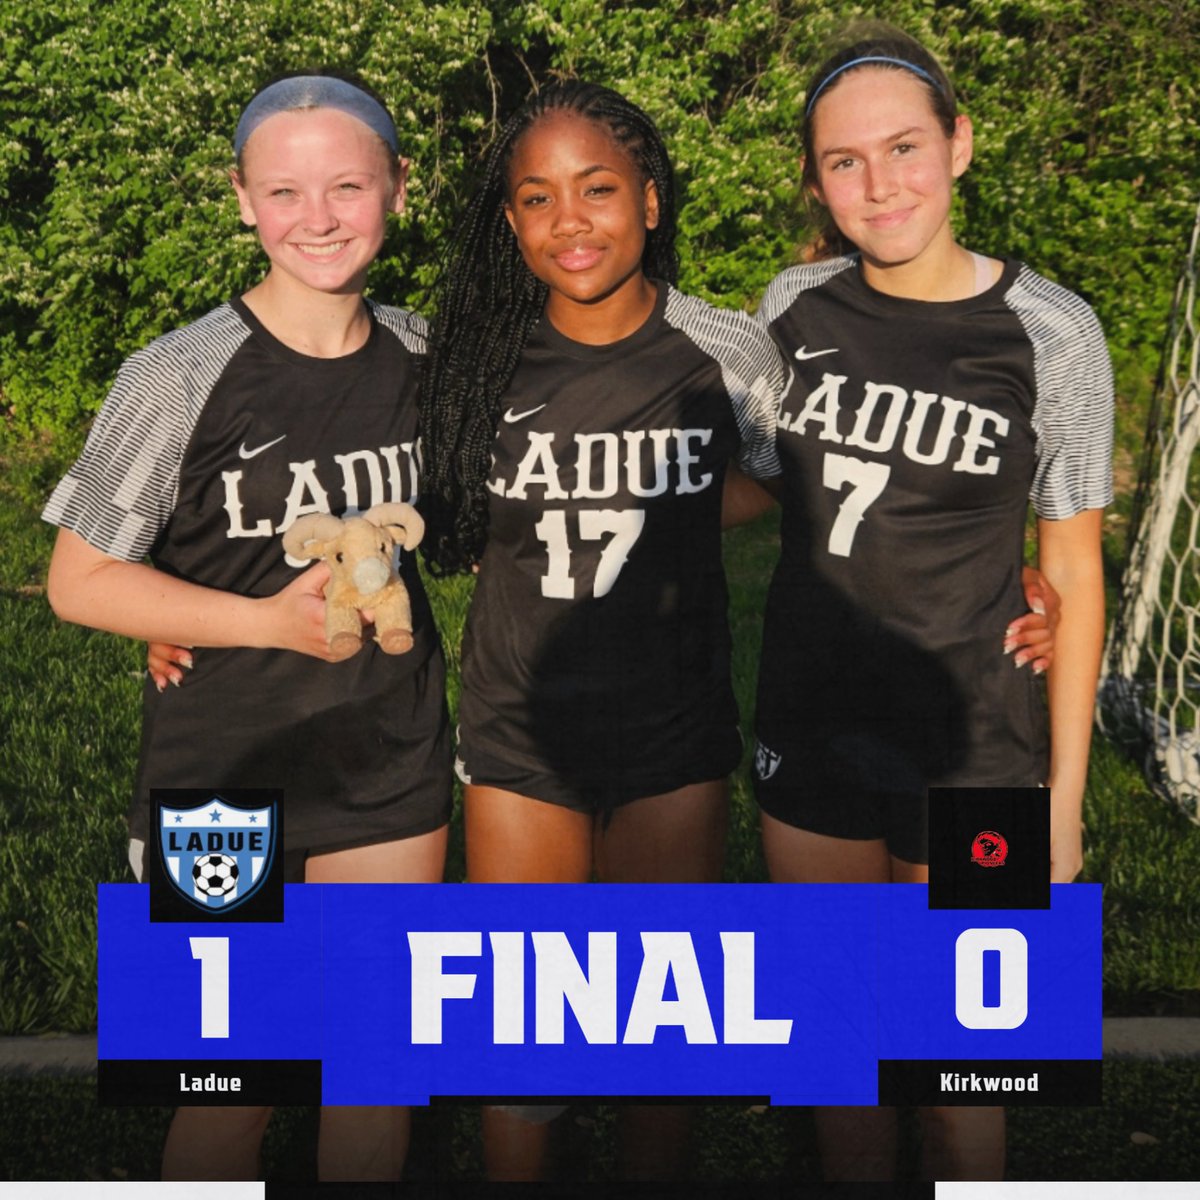 Varsity gets a gritty 1-0 over a tough Kirkwood squad! Marisa Schreiner with maybe the goal of the year with a beautiful head ball off a Nephthys Prothro cross to win it in the second half! 
Players of the game: Myckatyn, N. Prothro, and Schreiner! #WeOverMe 🐏🔒🤝